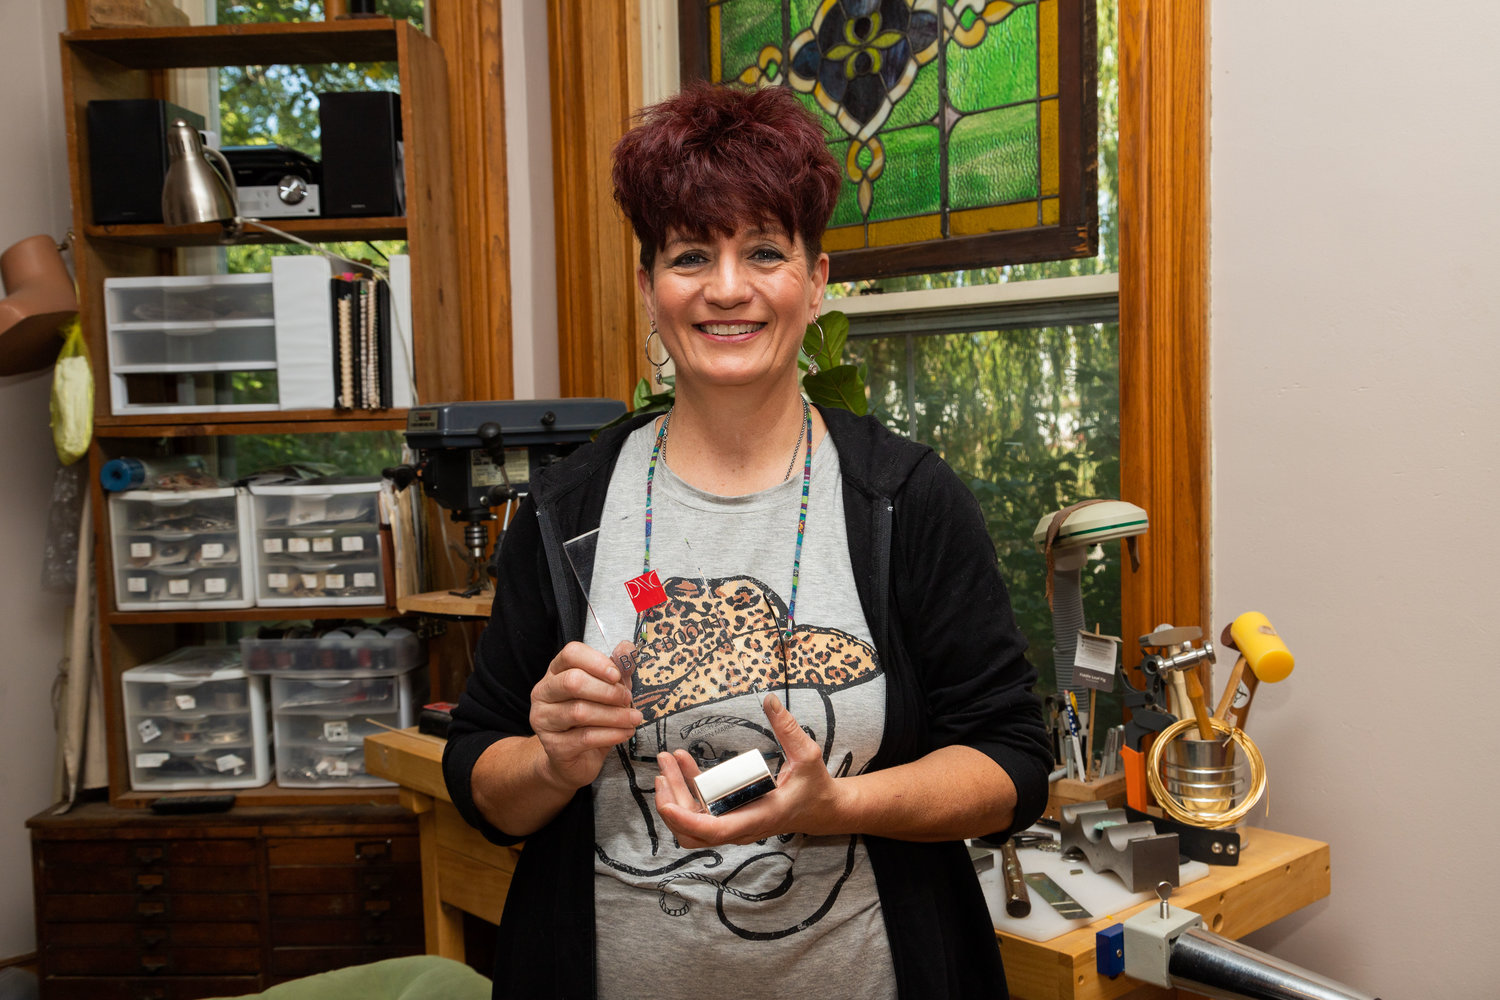 In the parlor of her historical home in Moberly, Anne Jansen shows an award she received for best booth on the 12th floor at a show in Dallas Western Market in 2014. Jansen created a western space from which to sell her Sureshot brand of bullet jewelry.